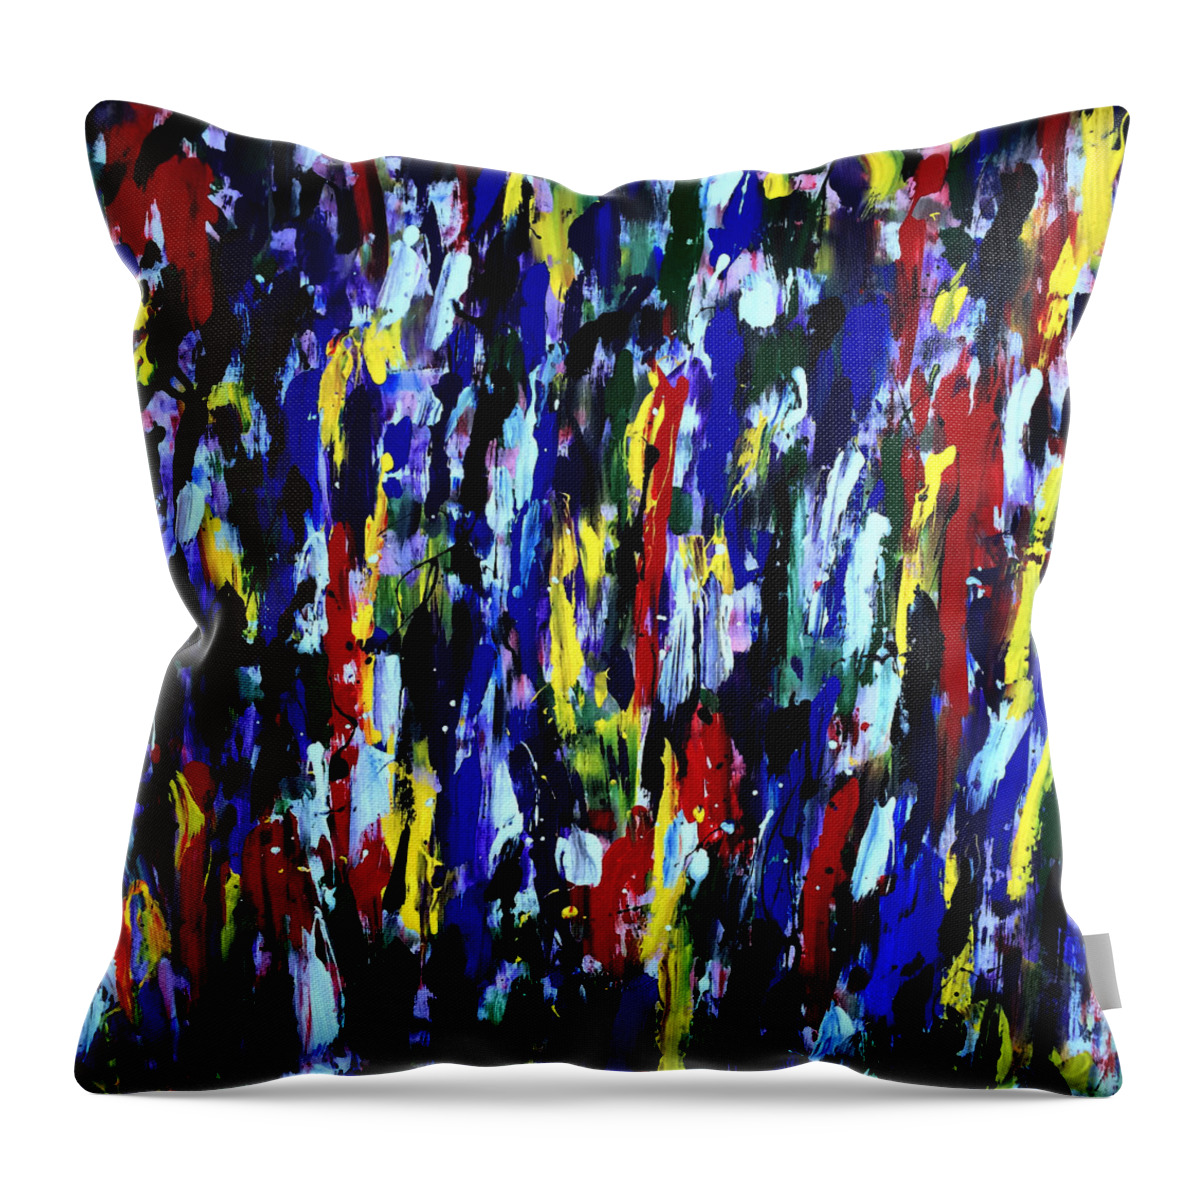 Color Throw Pillow featuring the painting Art Abstract Painting Modern Color by Robert R Splashy Art Abstract Paintings